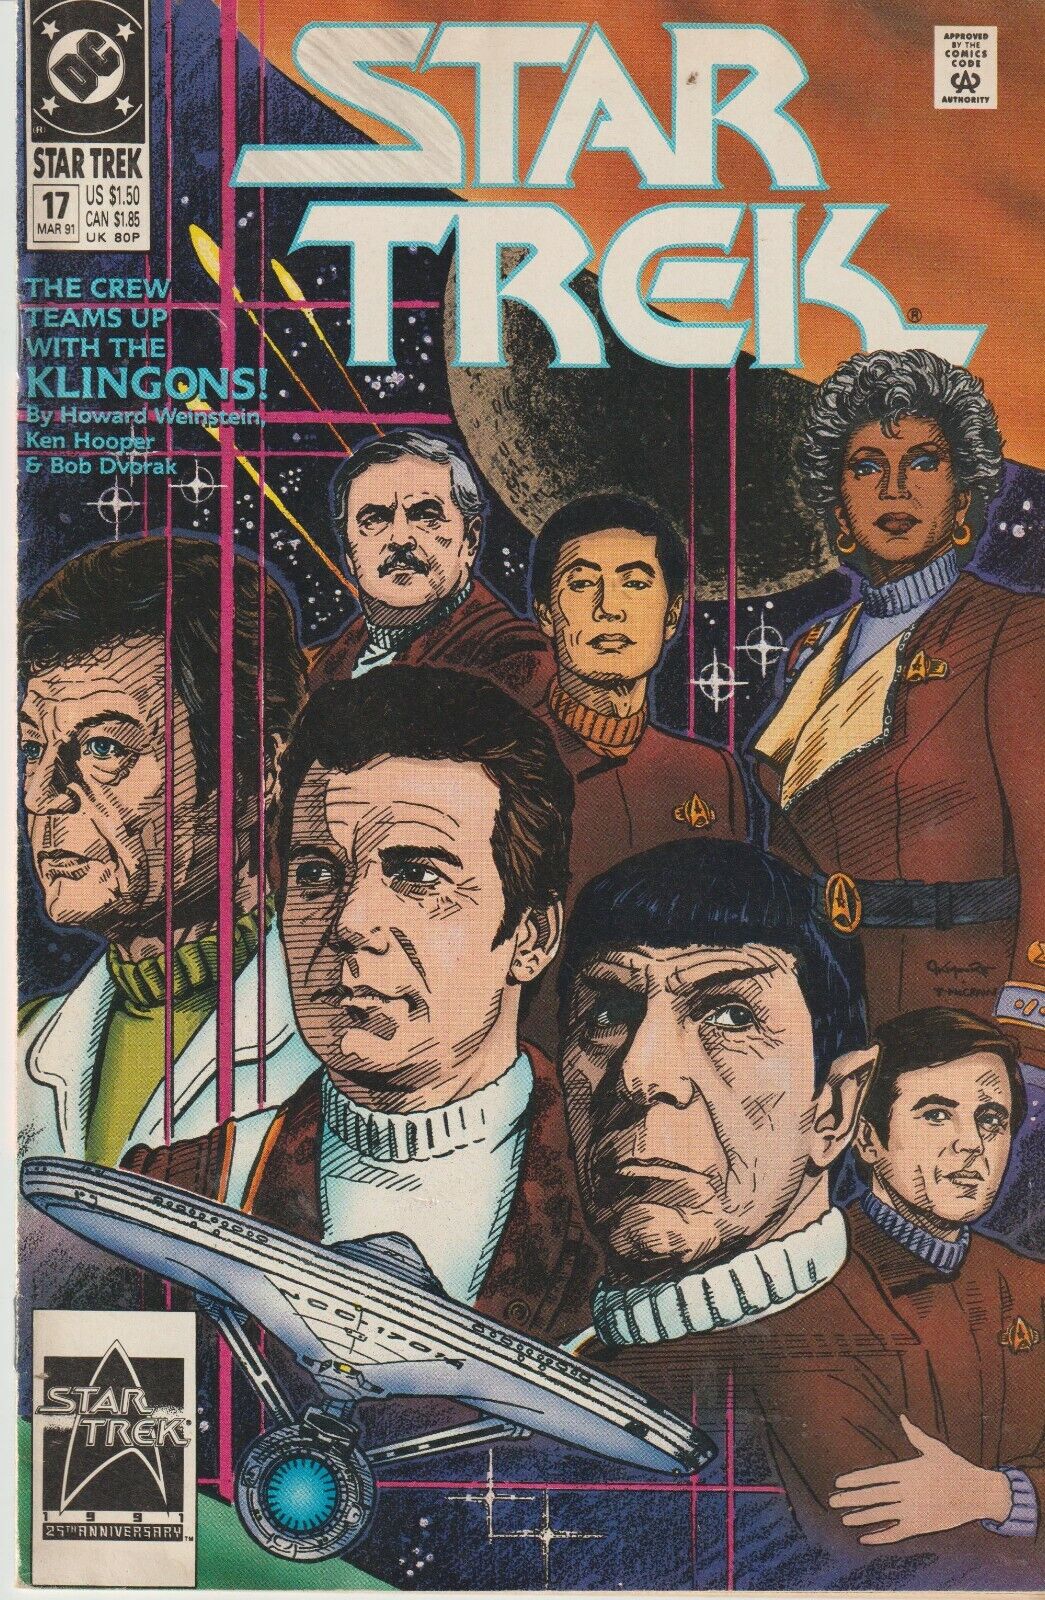 15 Assorted Star Trek Comic Books Very Good to Excellent Condition